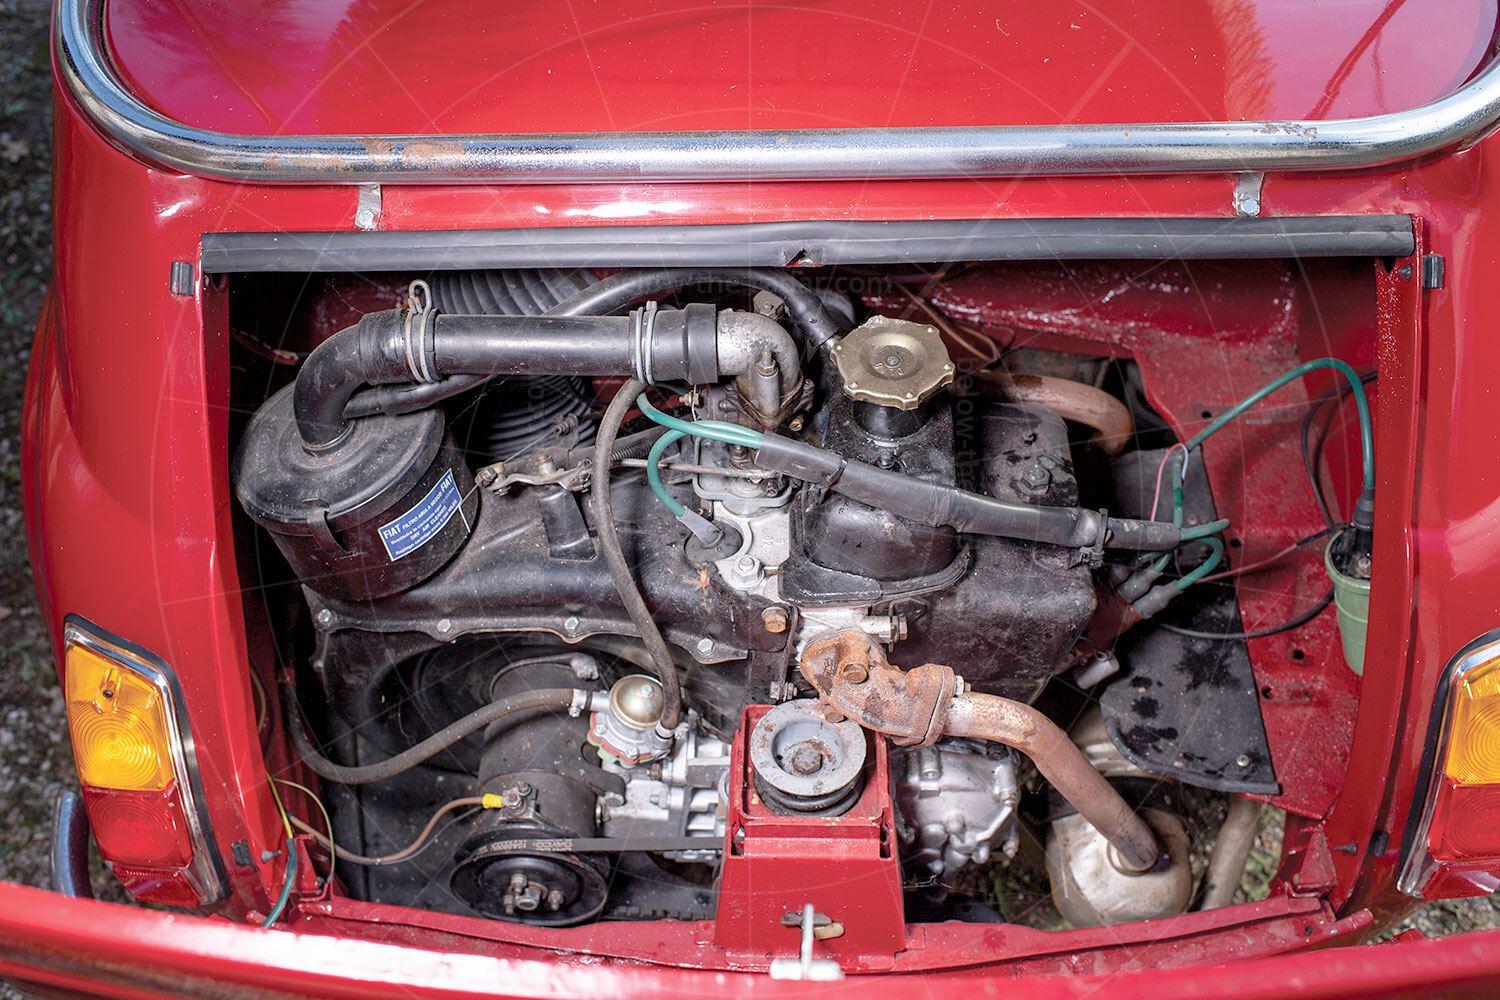 Fiat 500 Jolly engine bay Pic: RM Sotheby's | Fiat 500 Jolly engine bay